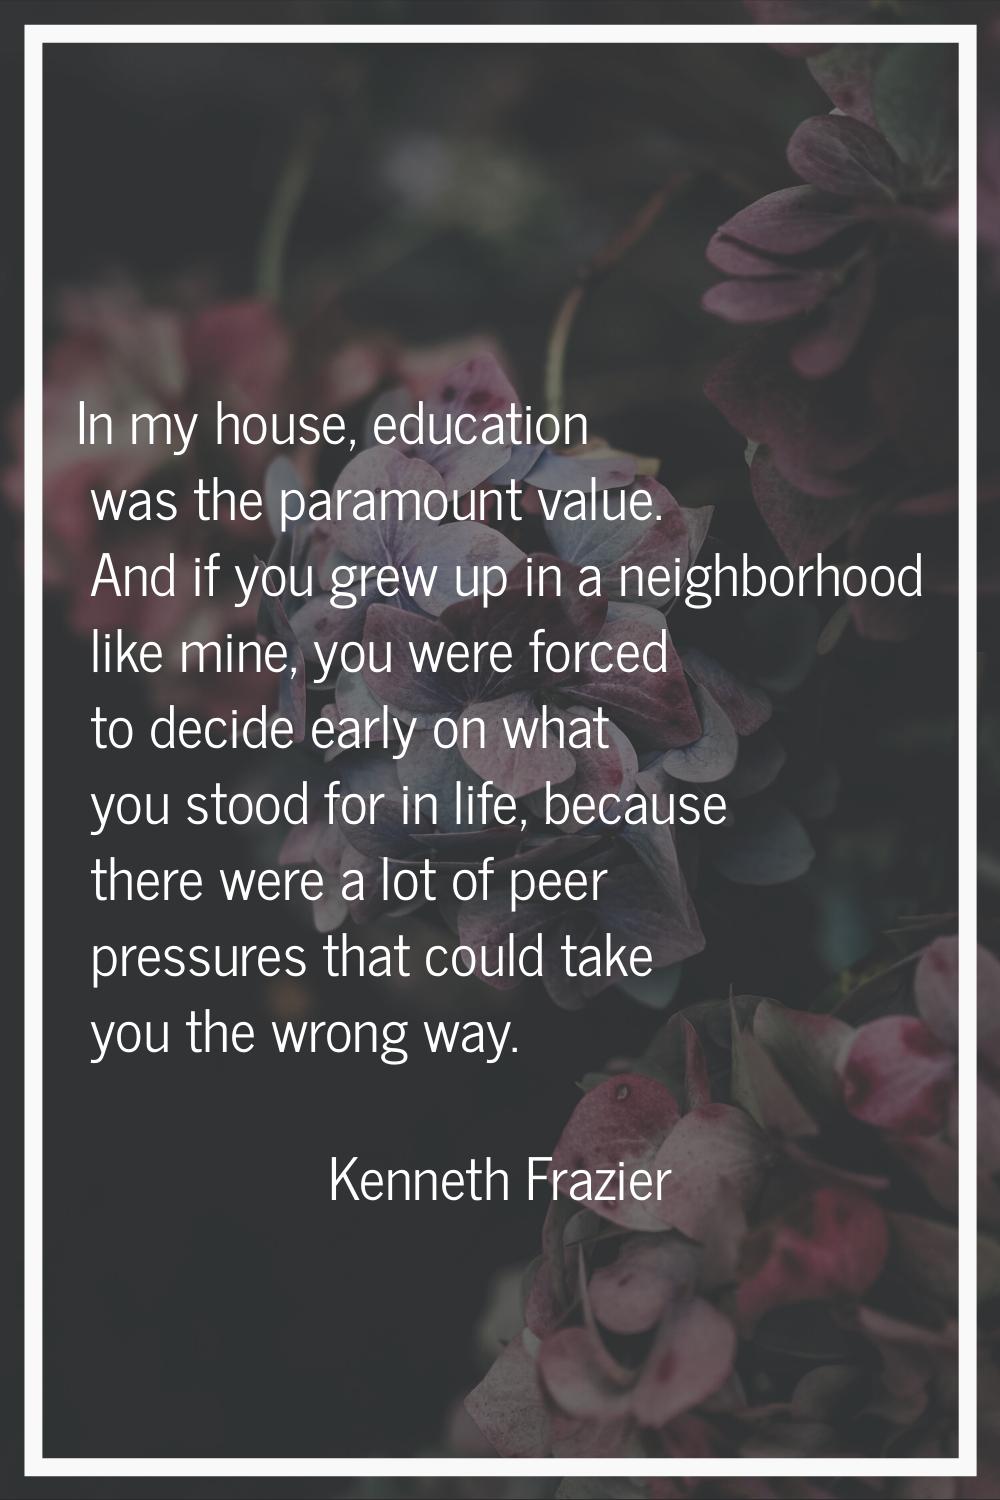 In my house, education was the paramount value. And if you grew up in a neighborhood like mine, you